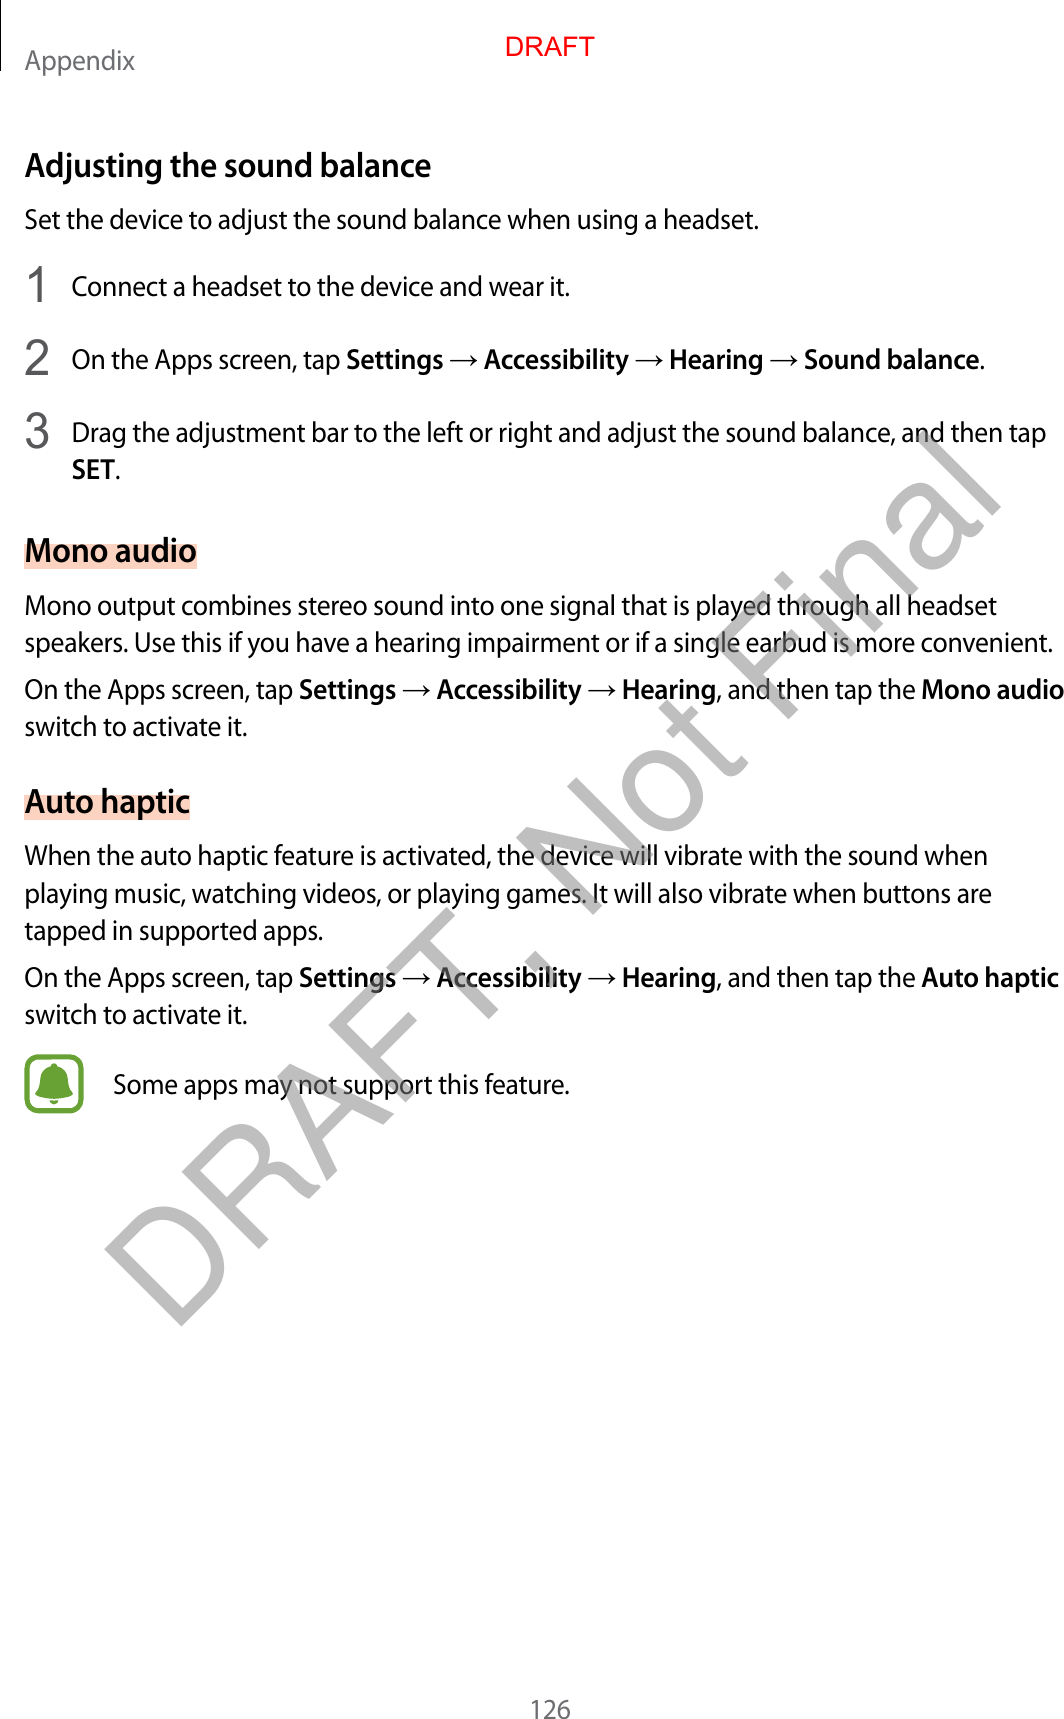 Appendix126Adjusting the sound balanceSet the device to adjust the sound balance when using a headset.1  Connect a headset to the device and wear it.2  On the Apps screen, tap Settings  Accessibility  Hearing  Sound balance.3  Drag the adjustment bar to the left or right and adjust the sound balance, and then tapSET.Mono audioMono output combines stereo sound into one signal that is played through all headset speakers. Use this if you have a hearing impairment or if a single earbud is more convenient.On the Apps screen, tap Settings  Accessibility  Hearing, and then tap the Mono audio switch to activate it.Auto hapticWhen the auto haptic feature is activated, the device will vibrate with the sound when playing music, watching videos, or playing games. It will also vibrate when buttons are tapped in supported apps.On the Apps screen, tap Settings  Accessibility  Hearing, and then tap the Auto haptic switch to activate it.Some apps may not support this feature.DRAFTDRAFT, Not Final